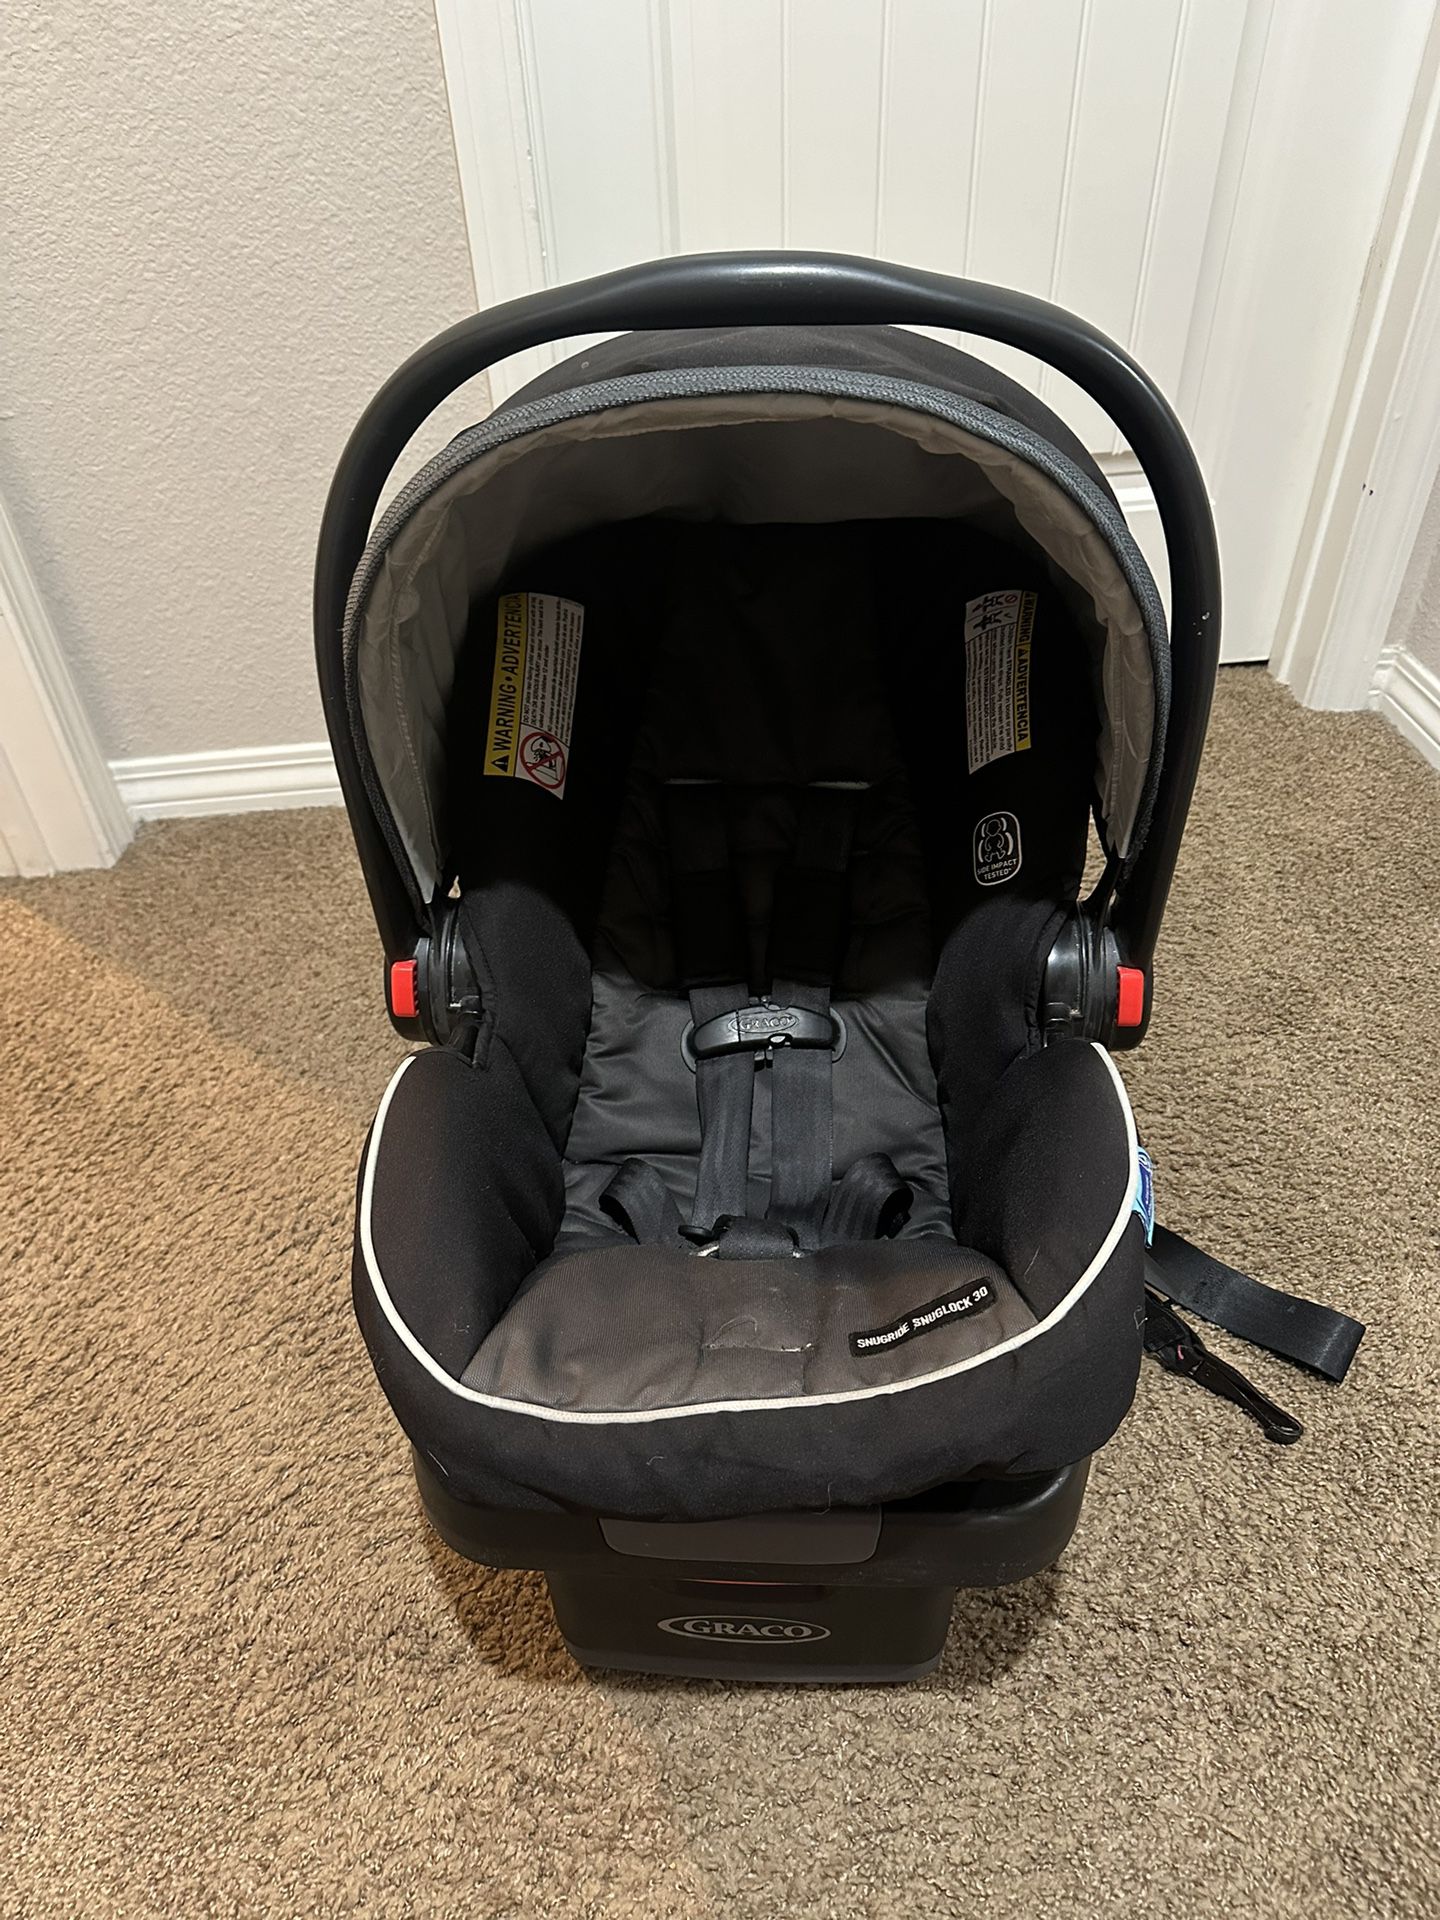 Graco Car Seat With Base